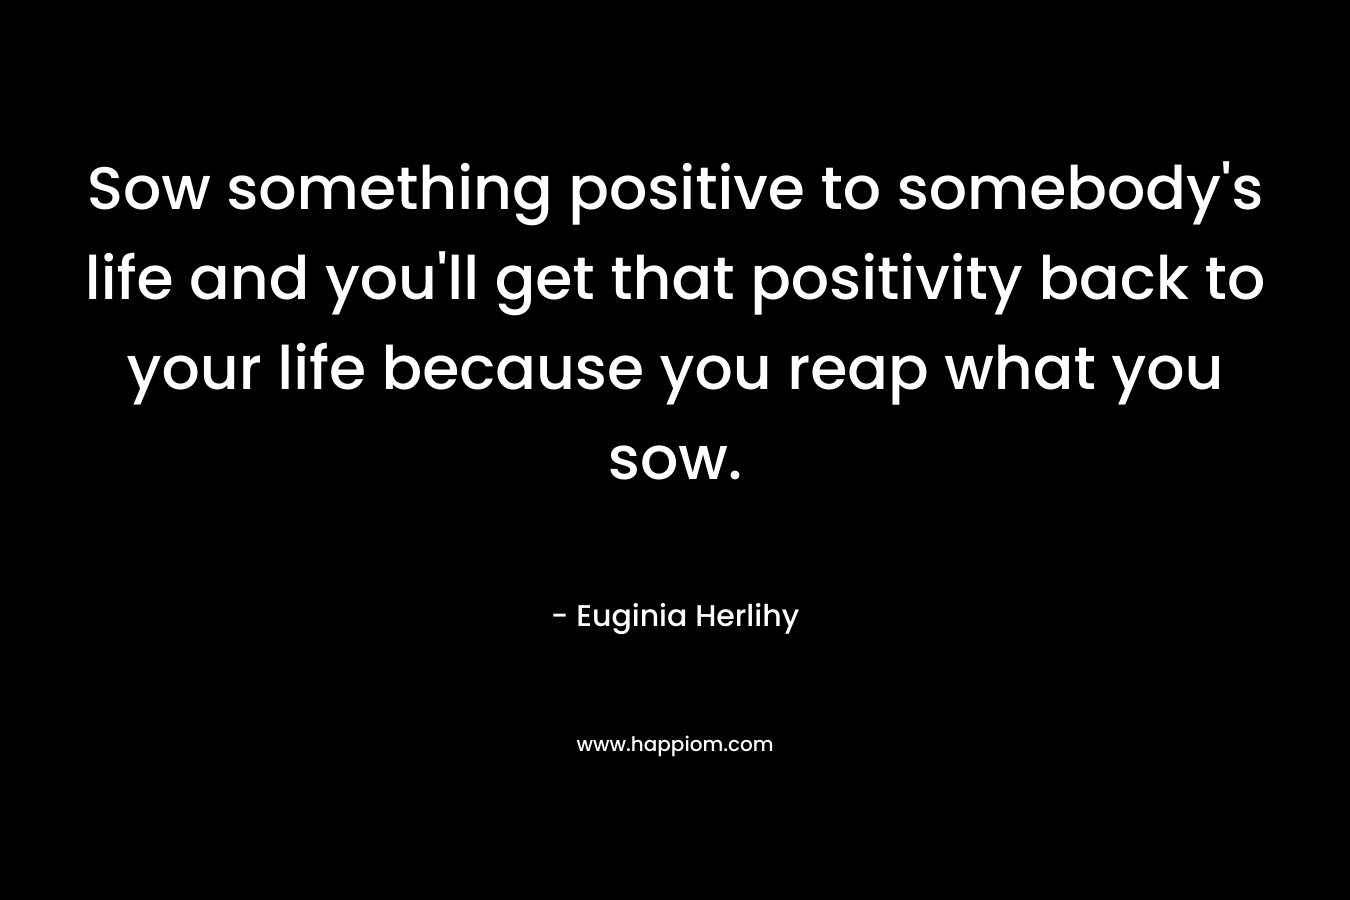 Sow something positive to somebody’s life and you’ll get that positivity back to your life because you reap what you sow. – Euginia Herlihy